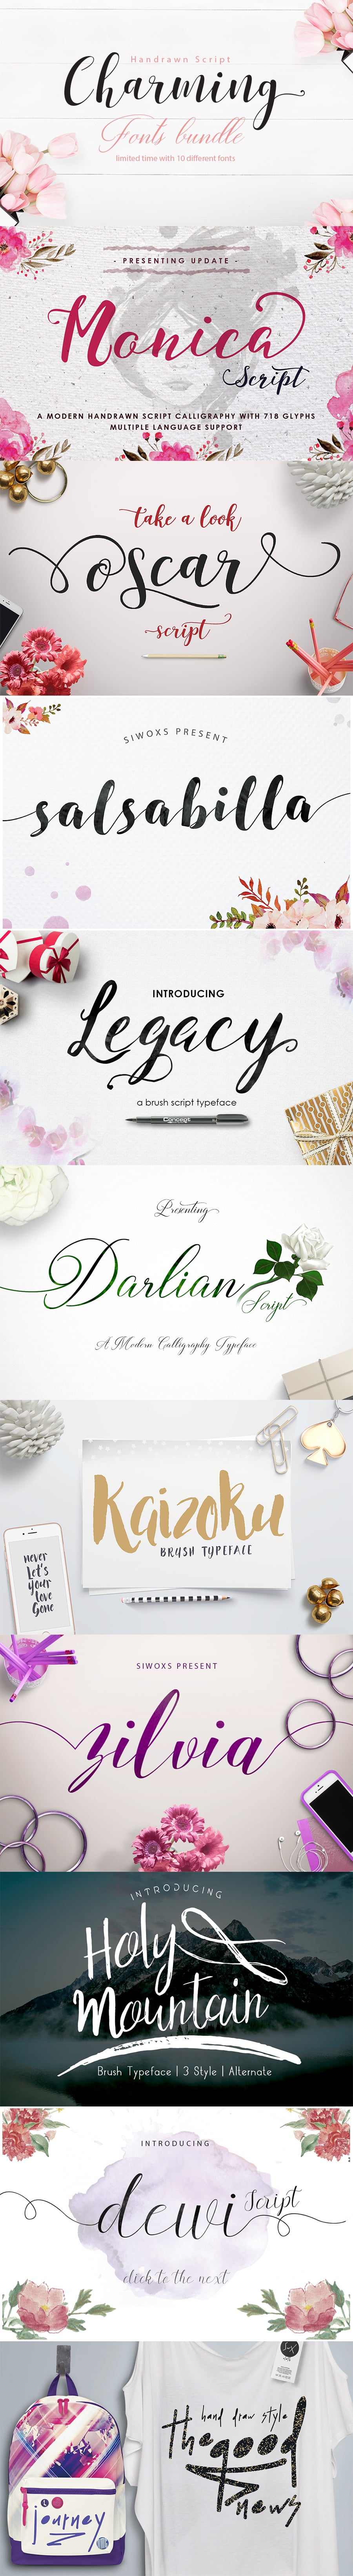 This is fashionable and contemporary font for luxury event and romantic cards.